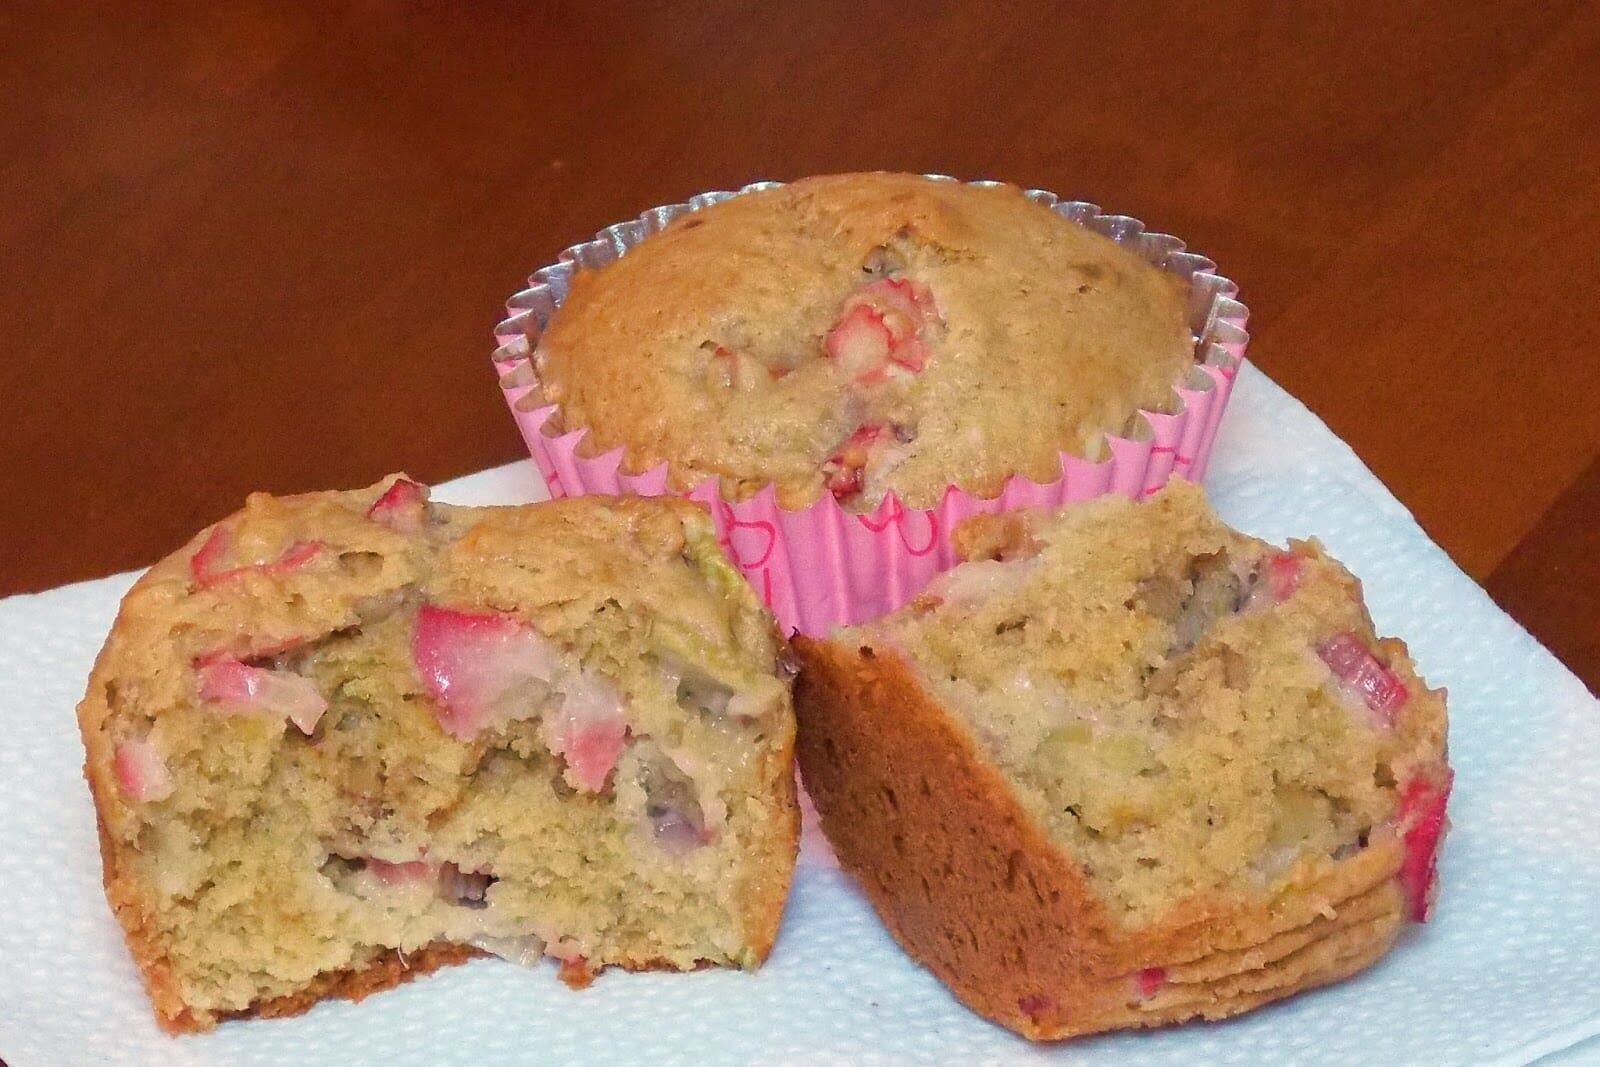 One rhubarb walnut muffin cut in half on a white plate with a whole muffin in the background.